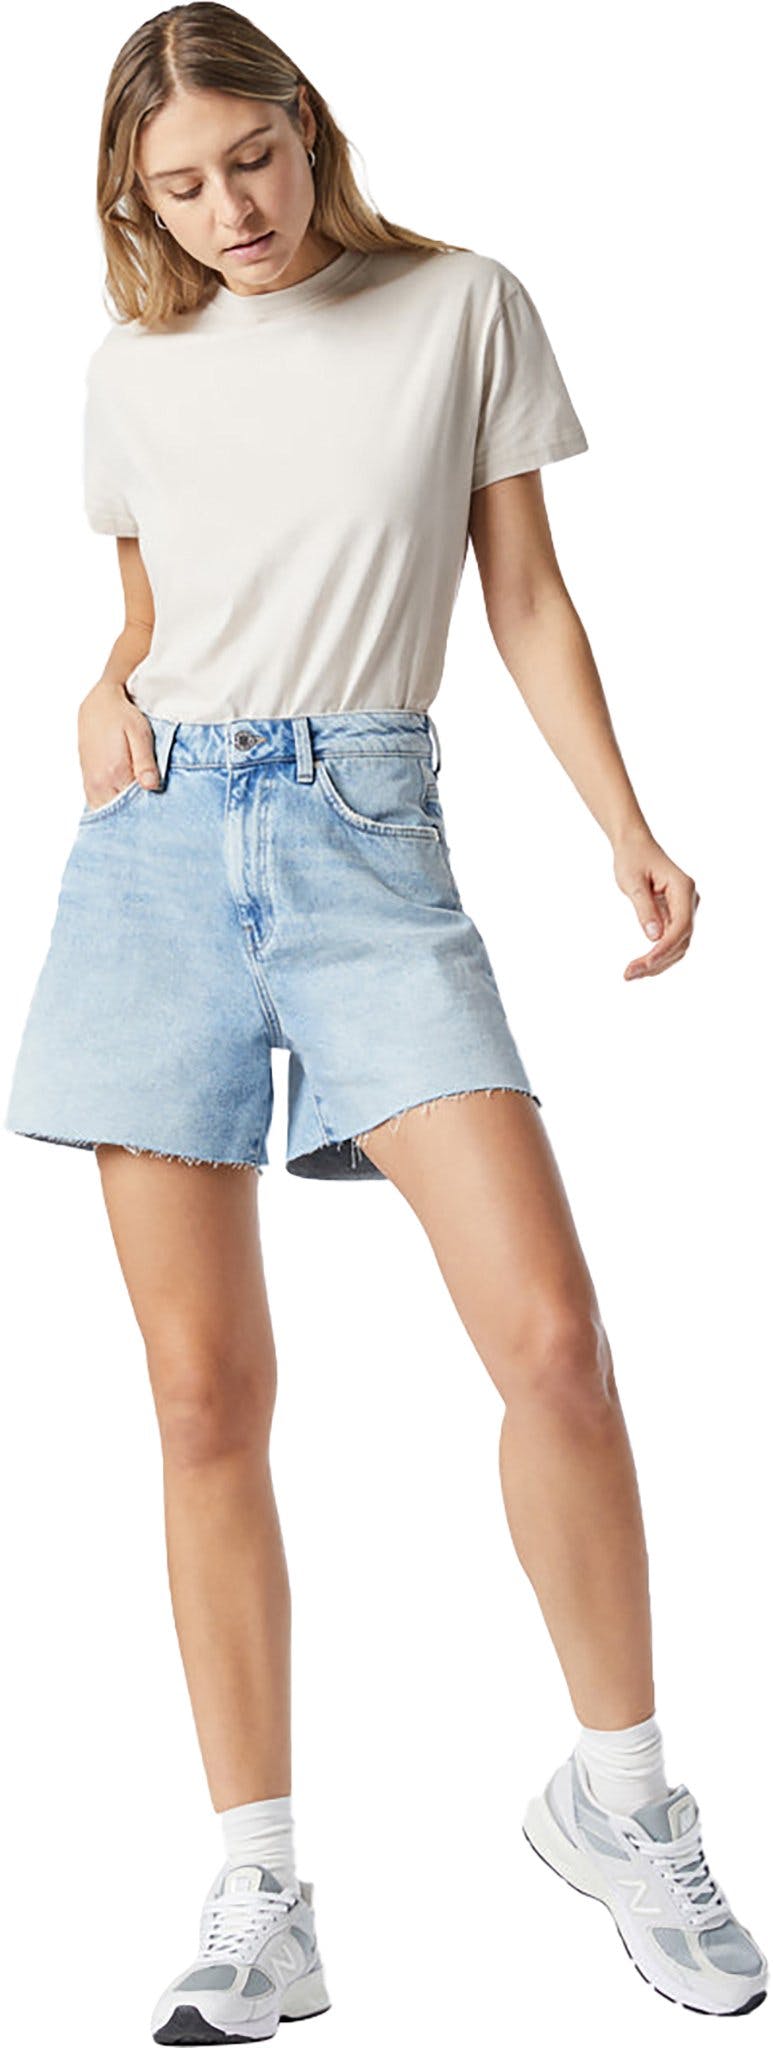 Product image for Millie Relaxed Fit Shorts - Women's